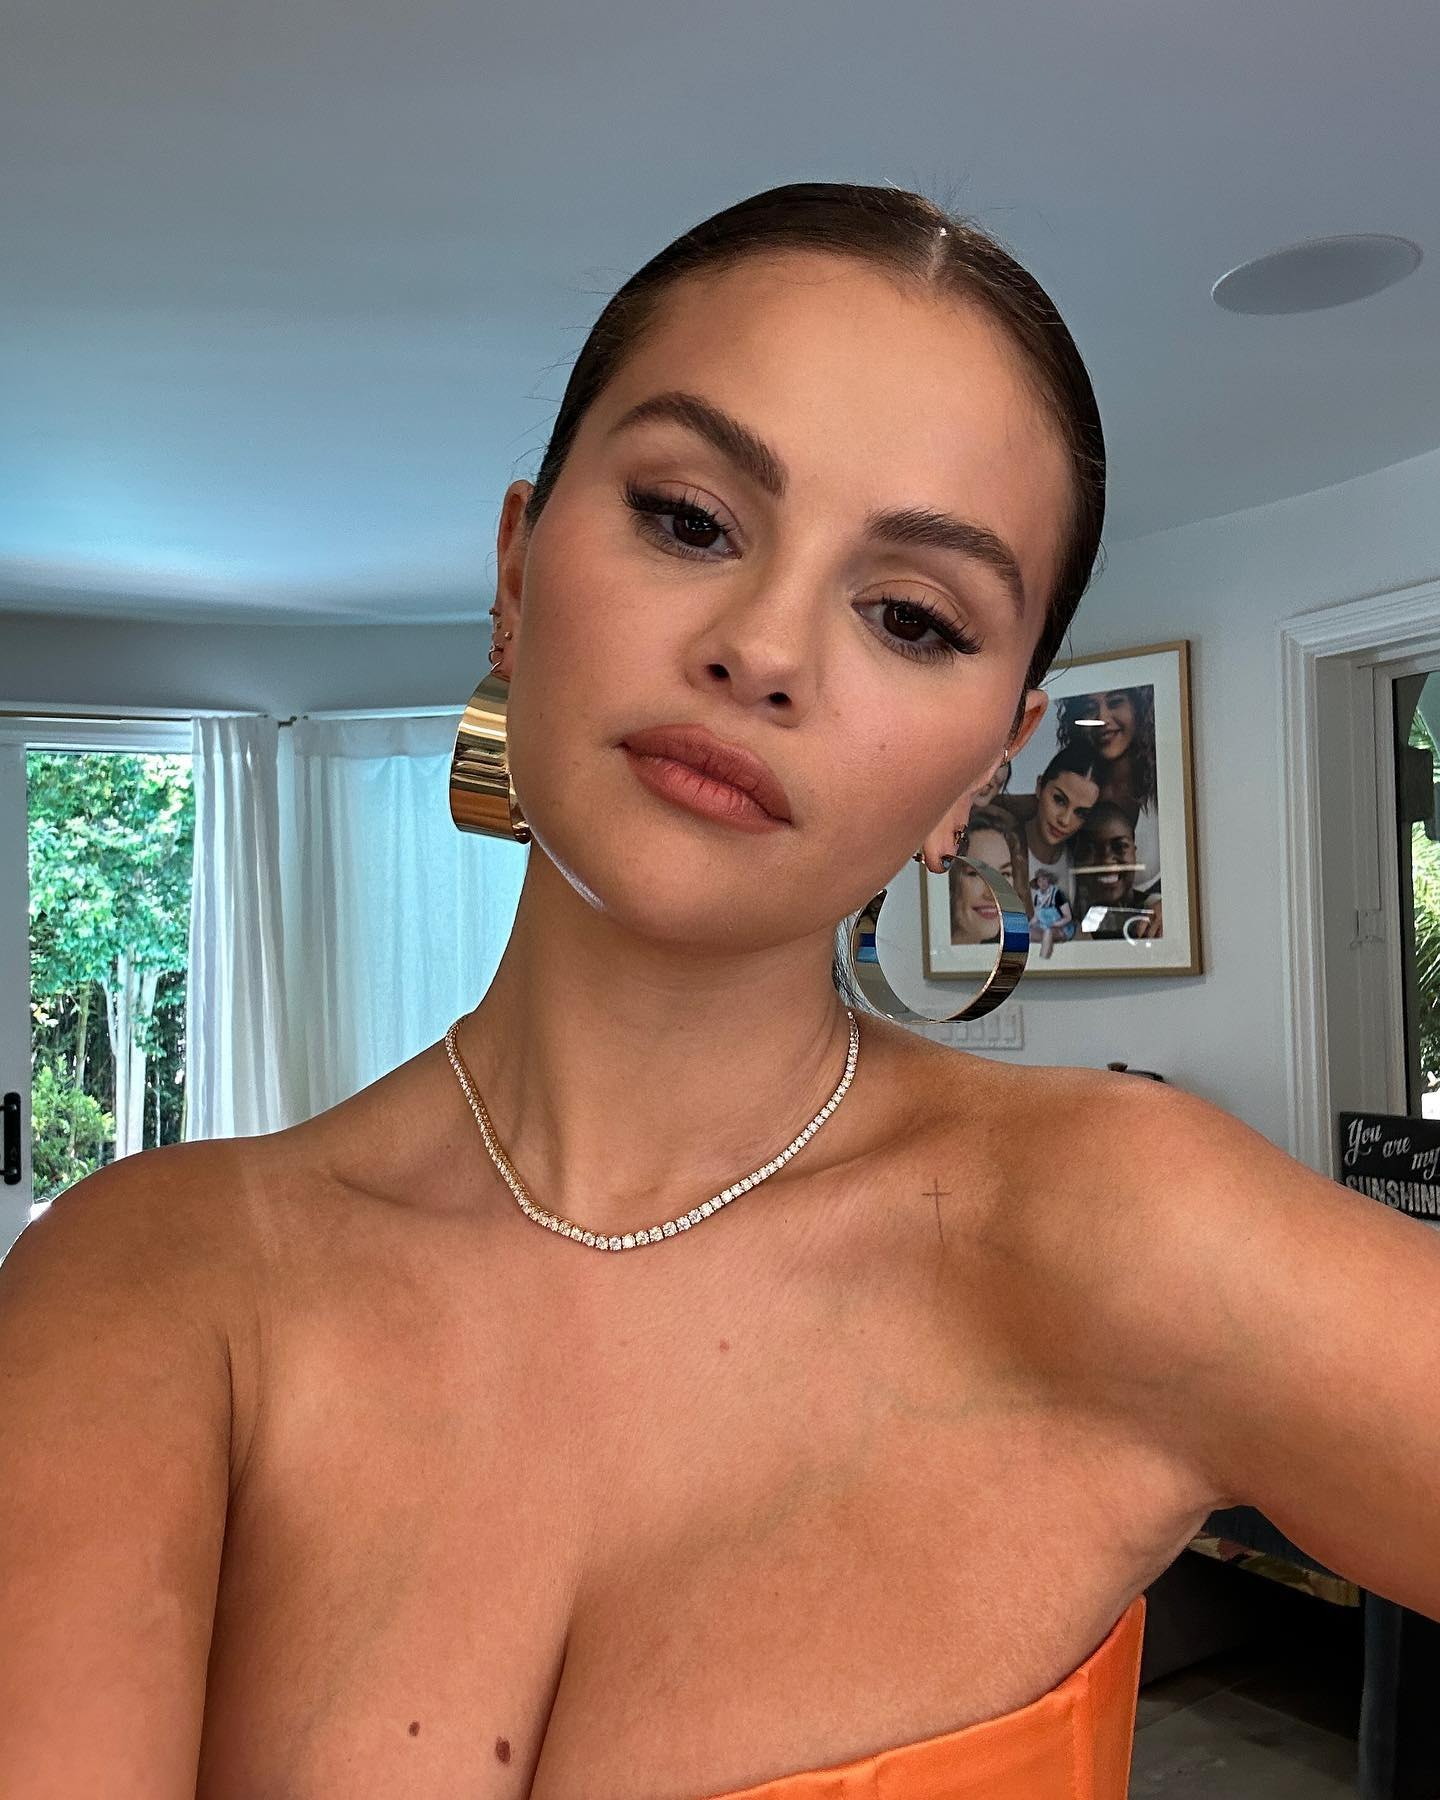 ayla farrell recommends selena gomez full nude pic